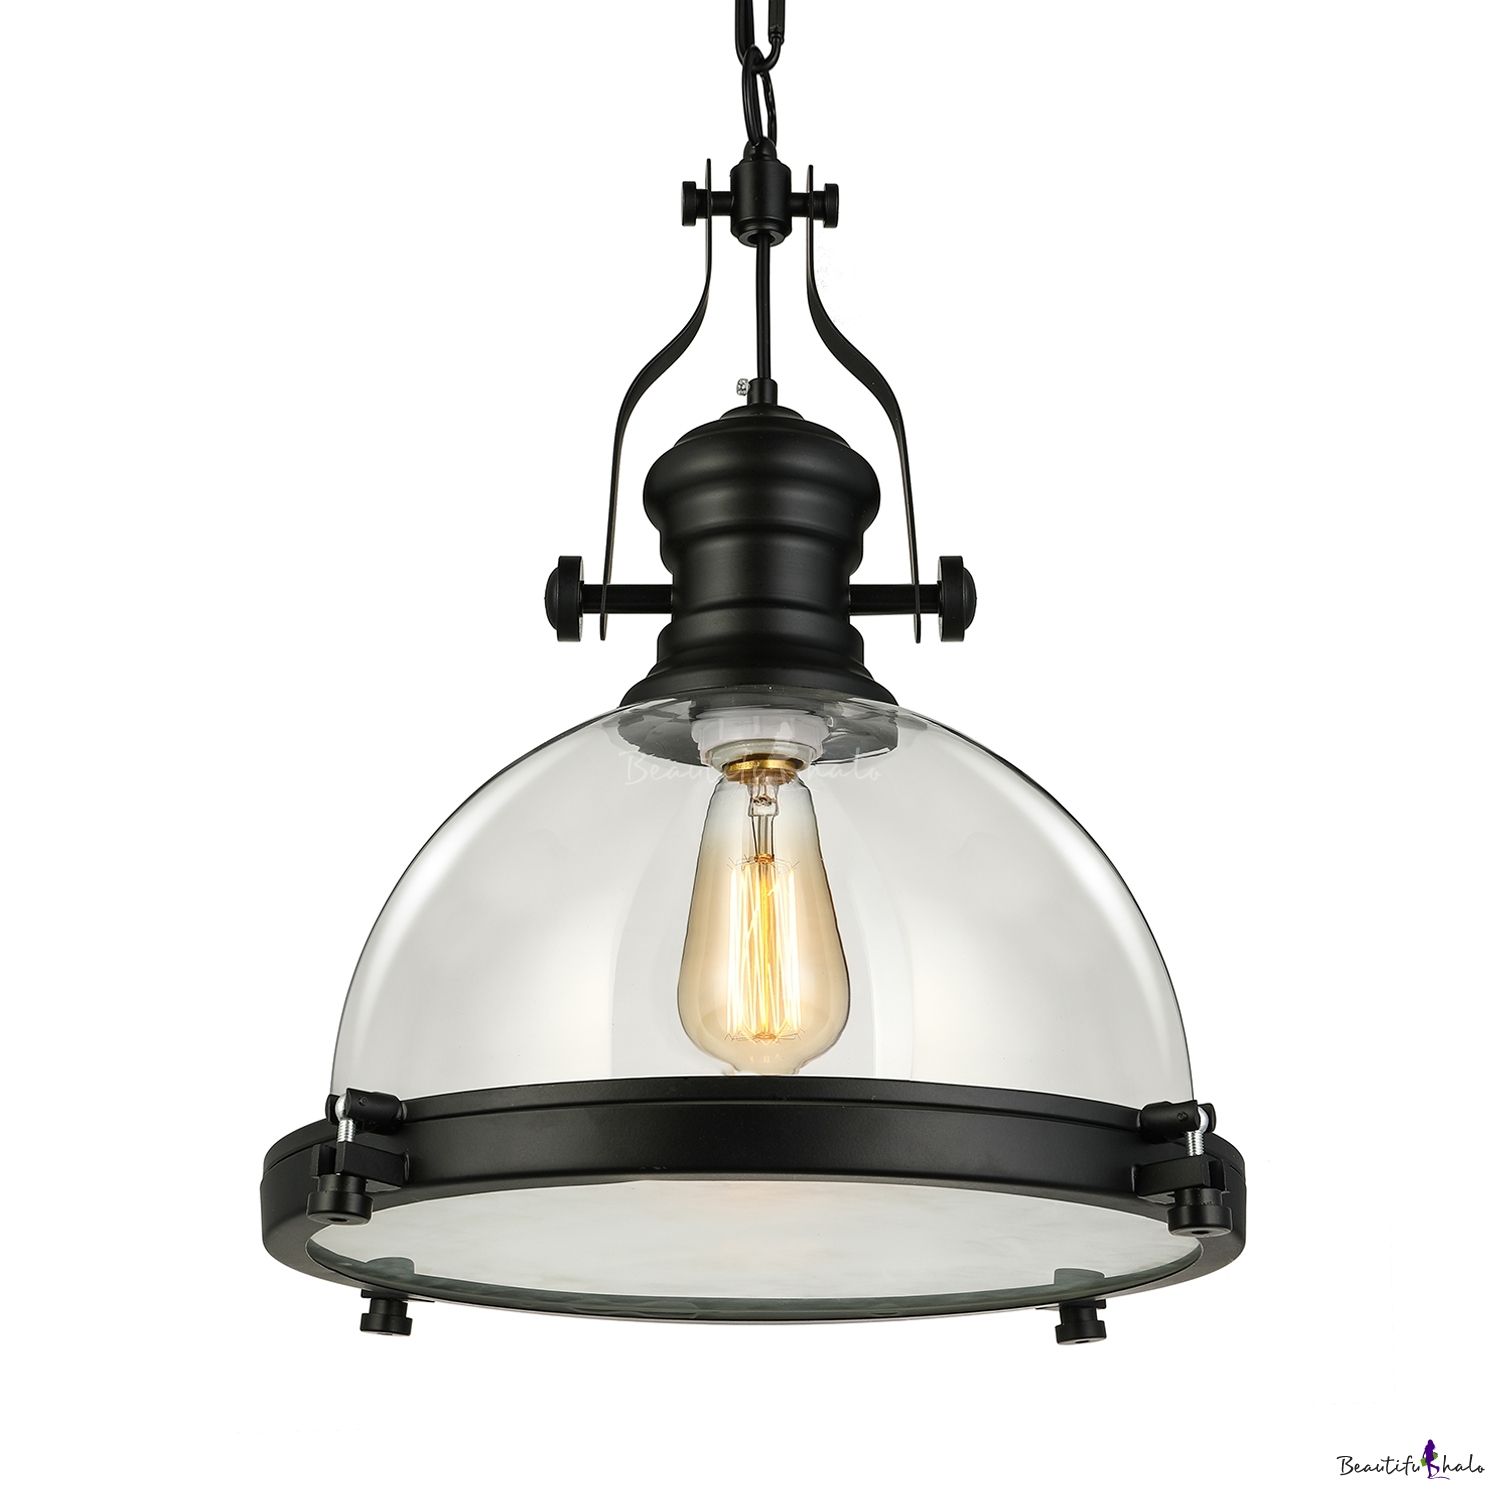 Clear Glass Dome Pendant Light In Black Finish For Kitchen Throughout Black And Gold Kitchen Island Light Pendant (View 12 of 15)